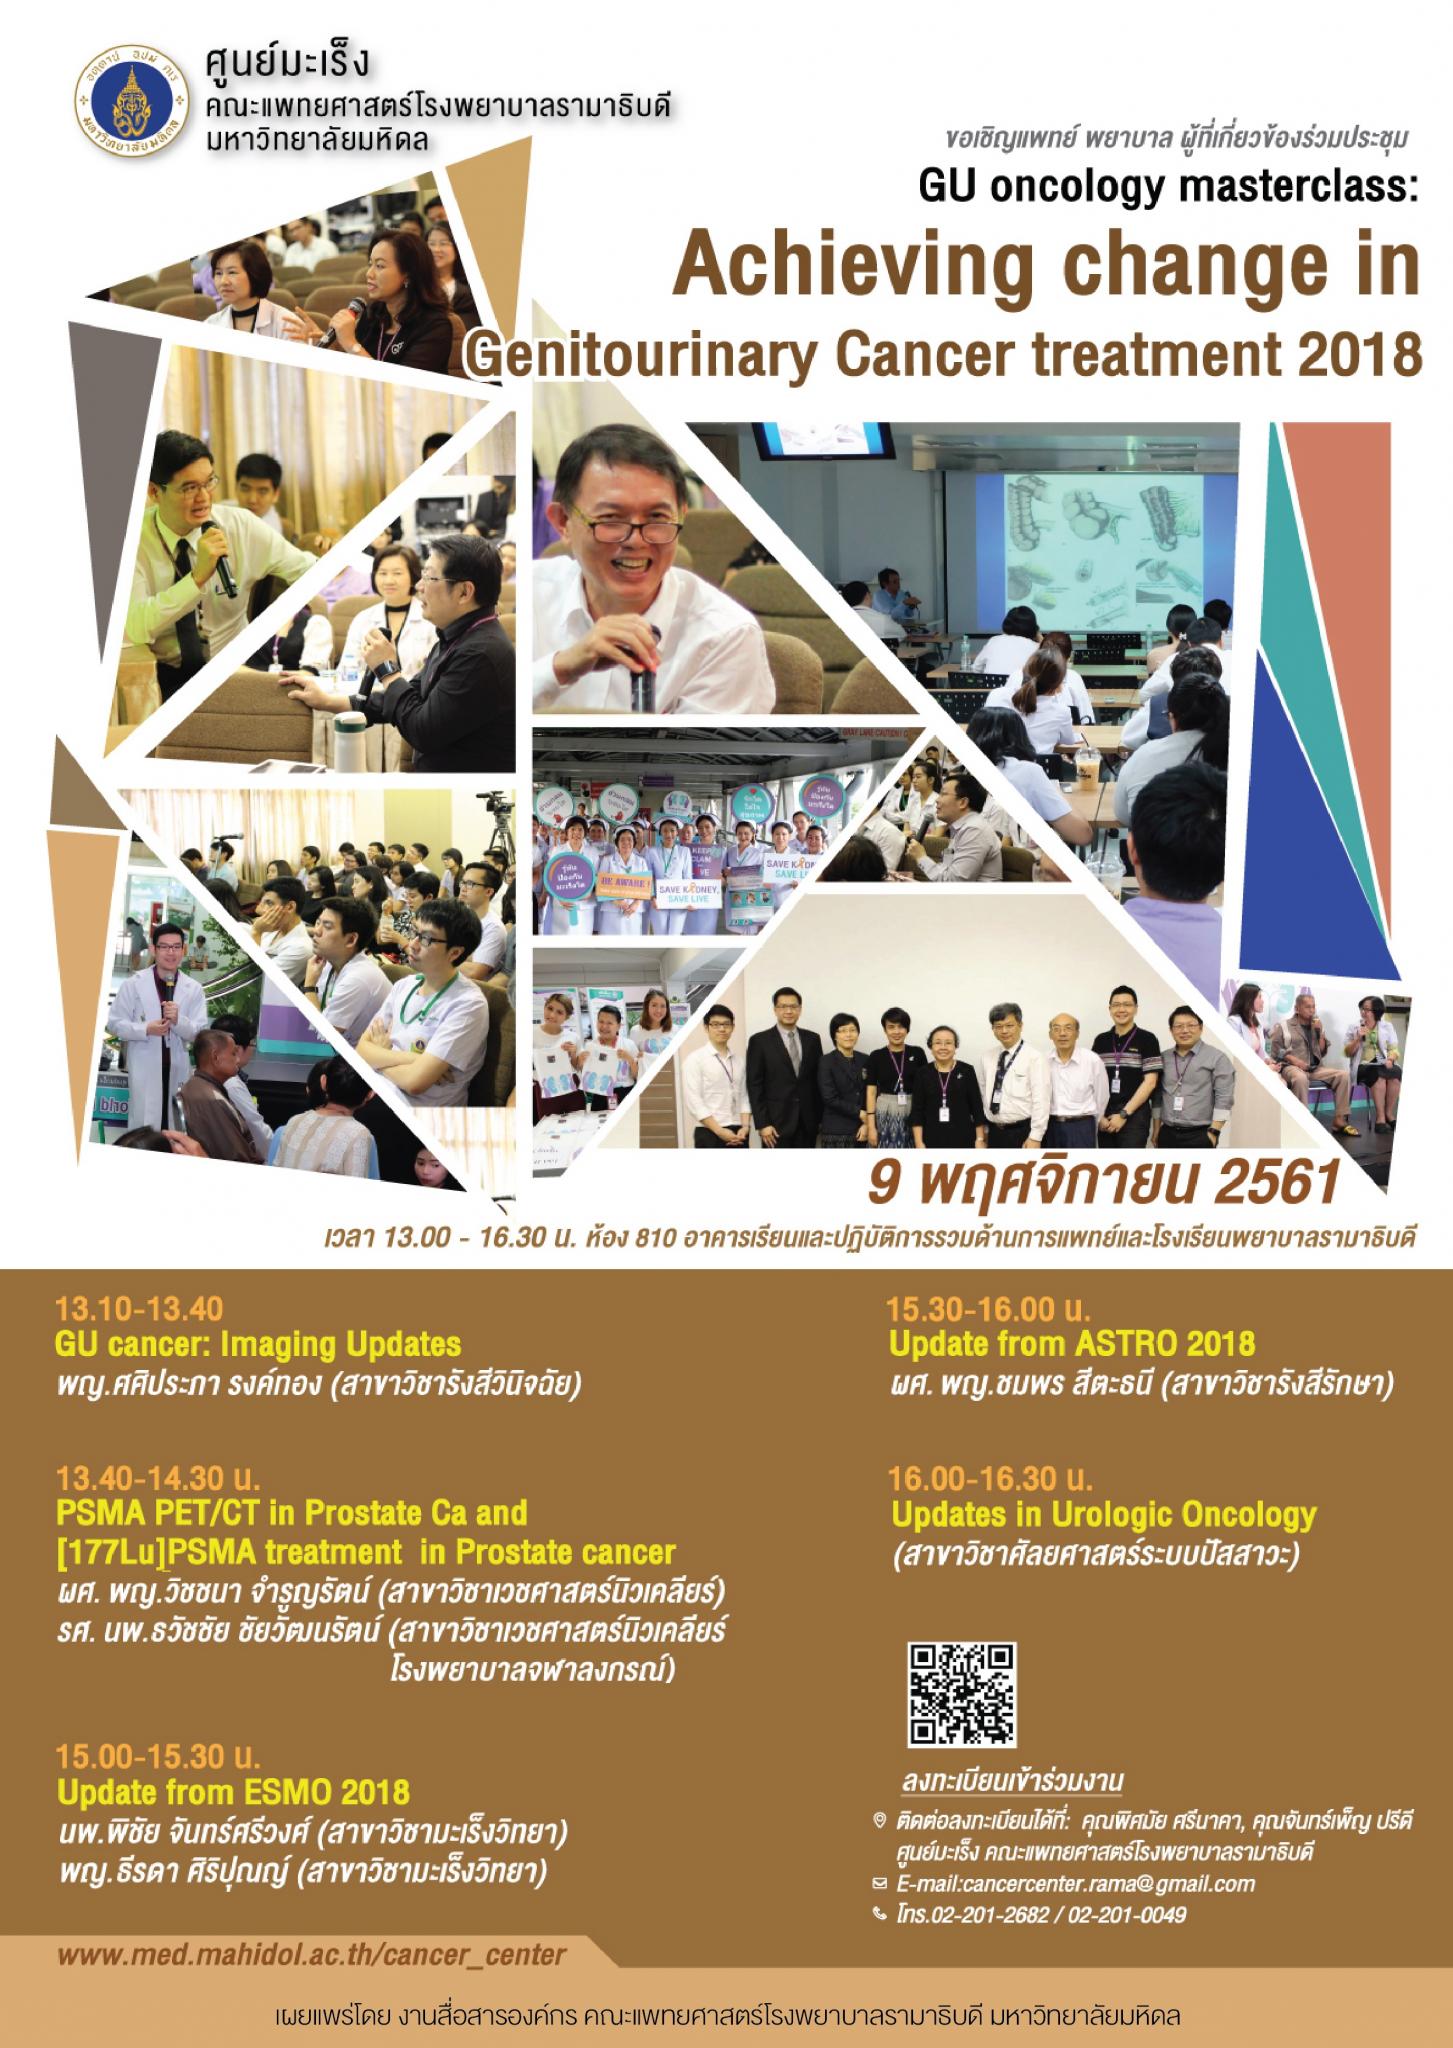 GU oncology masterclass: Achieving change in Genitourinary Cancer treatment 2018